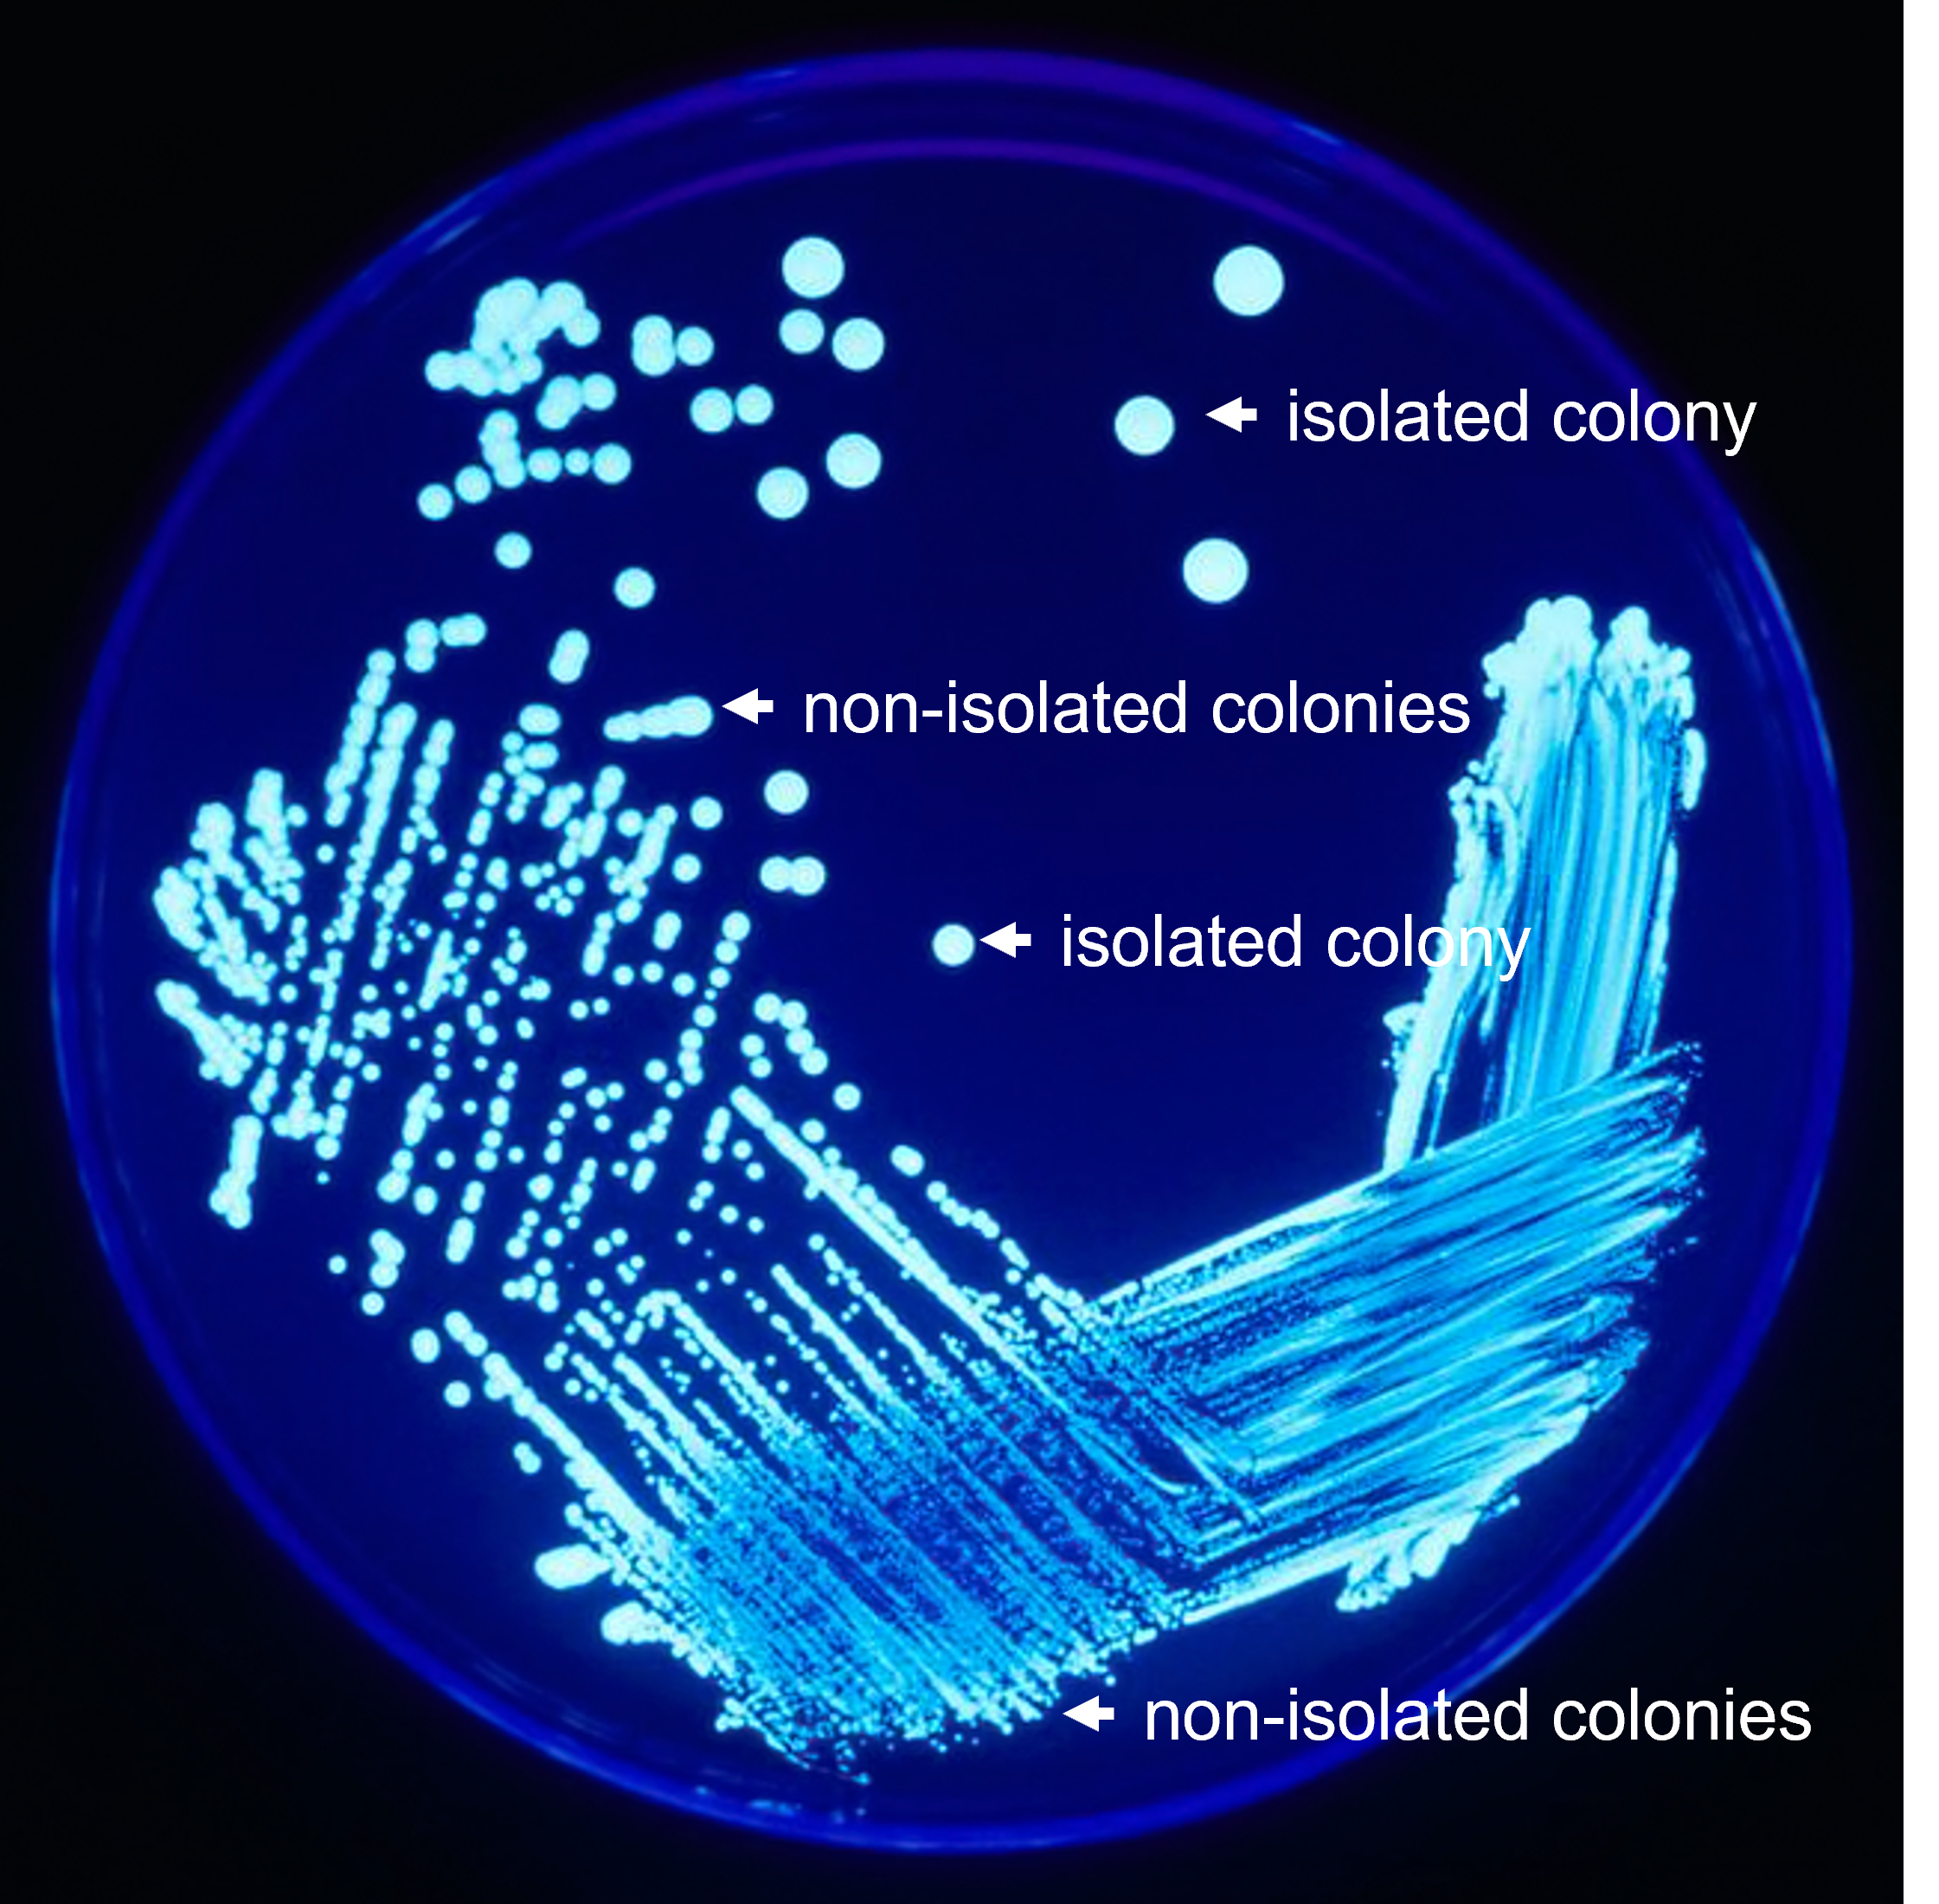 isolated and non-isolated colonies.png